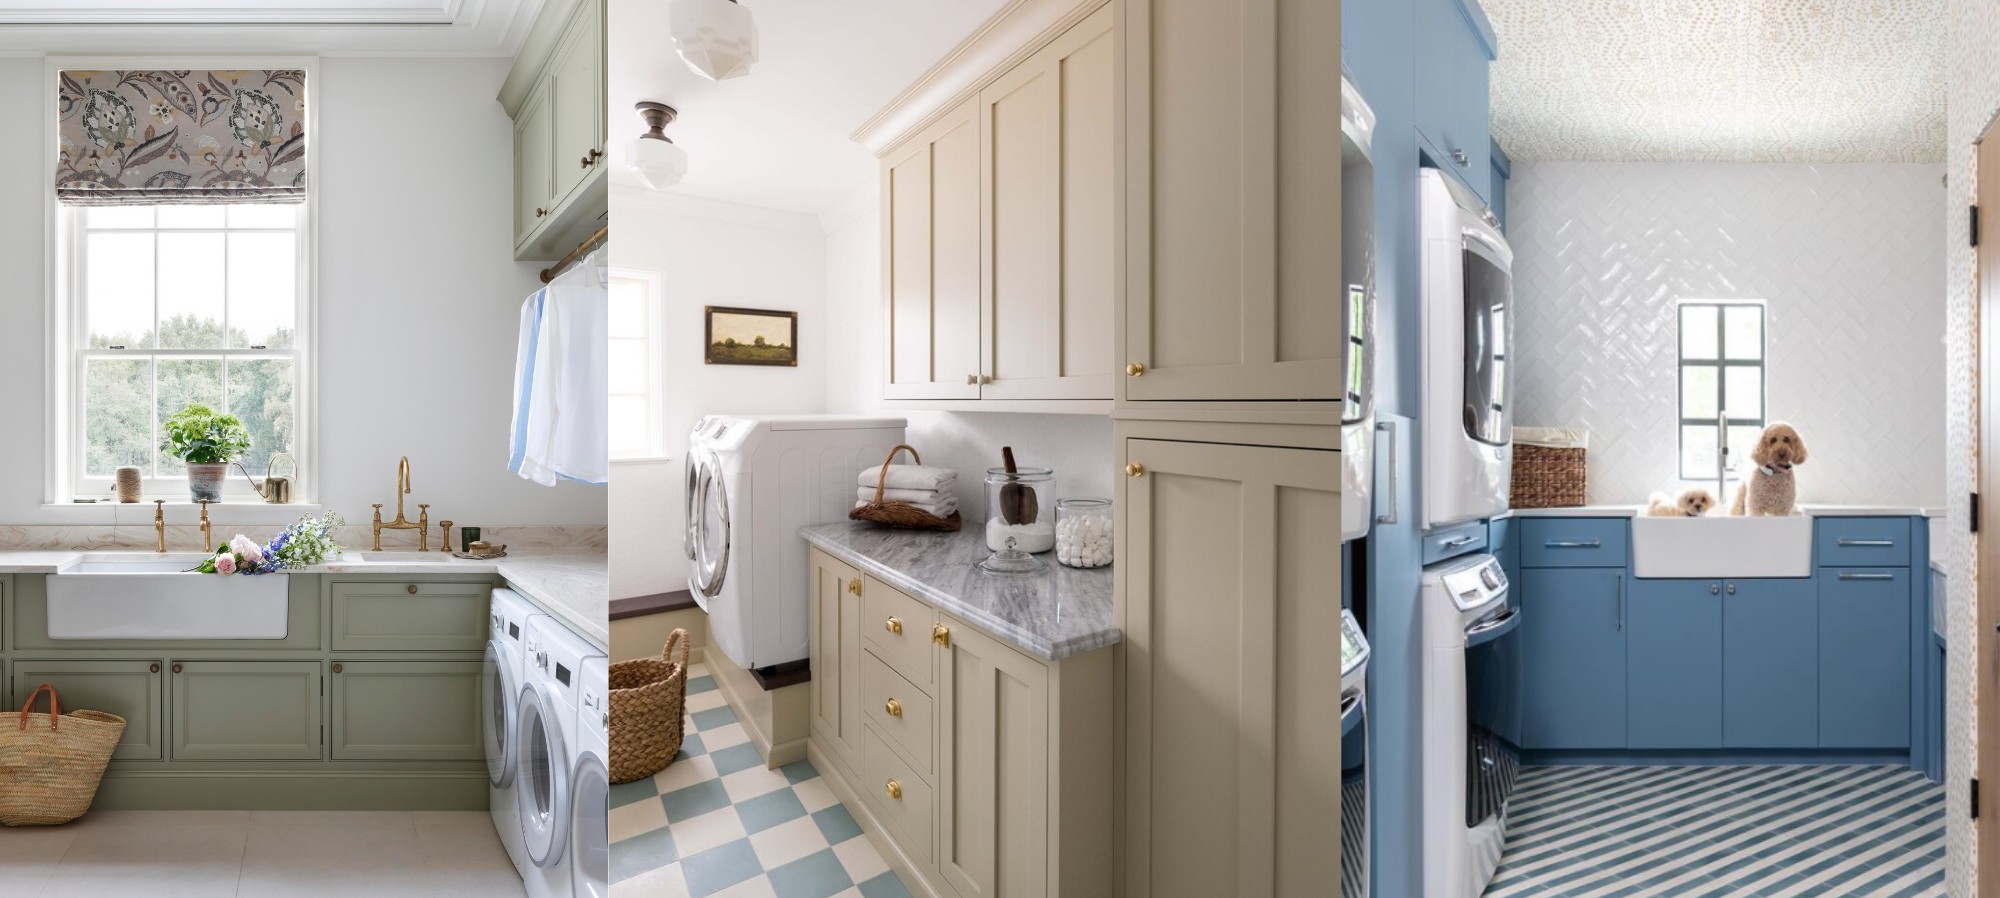 How to Organize Your Bathroom Cabinets for an Efficient, Tidy Space -  Practical Perfection